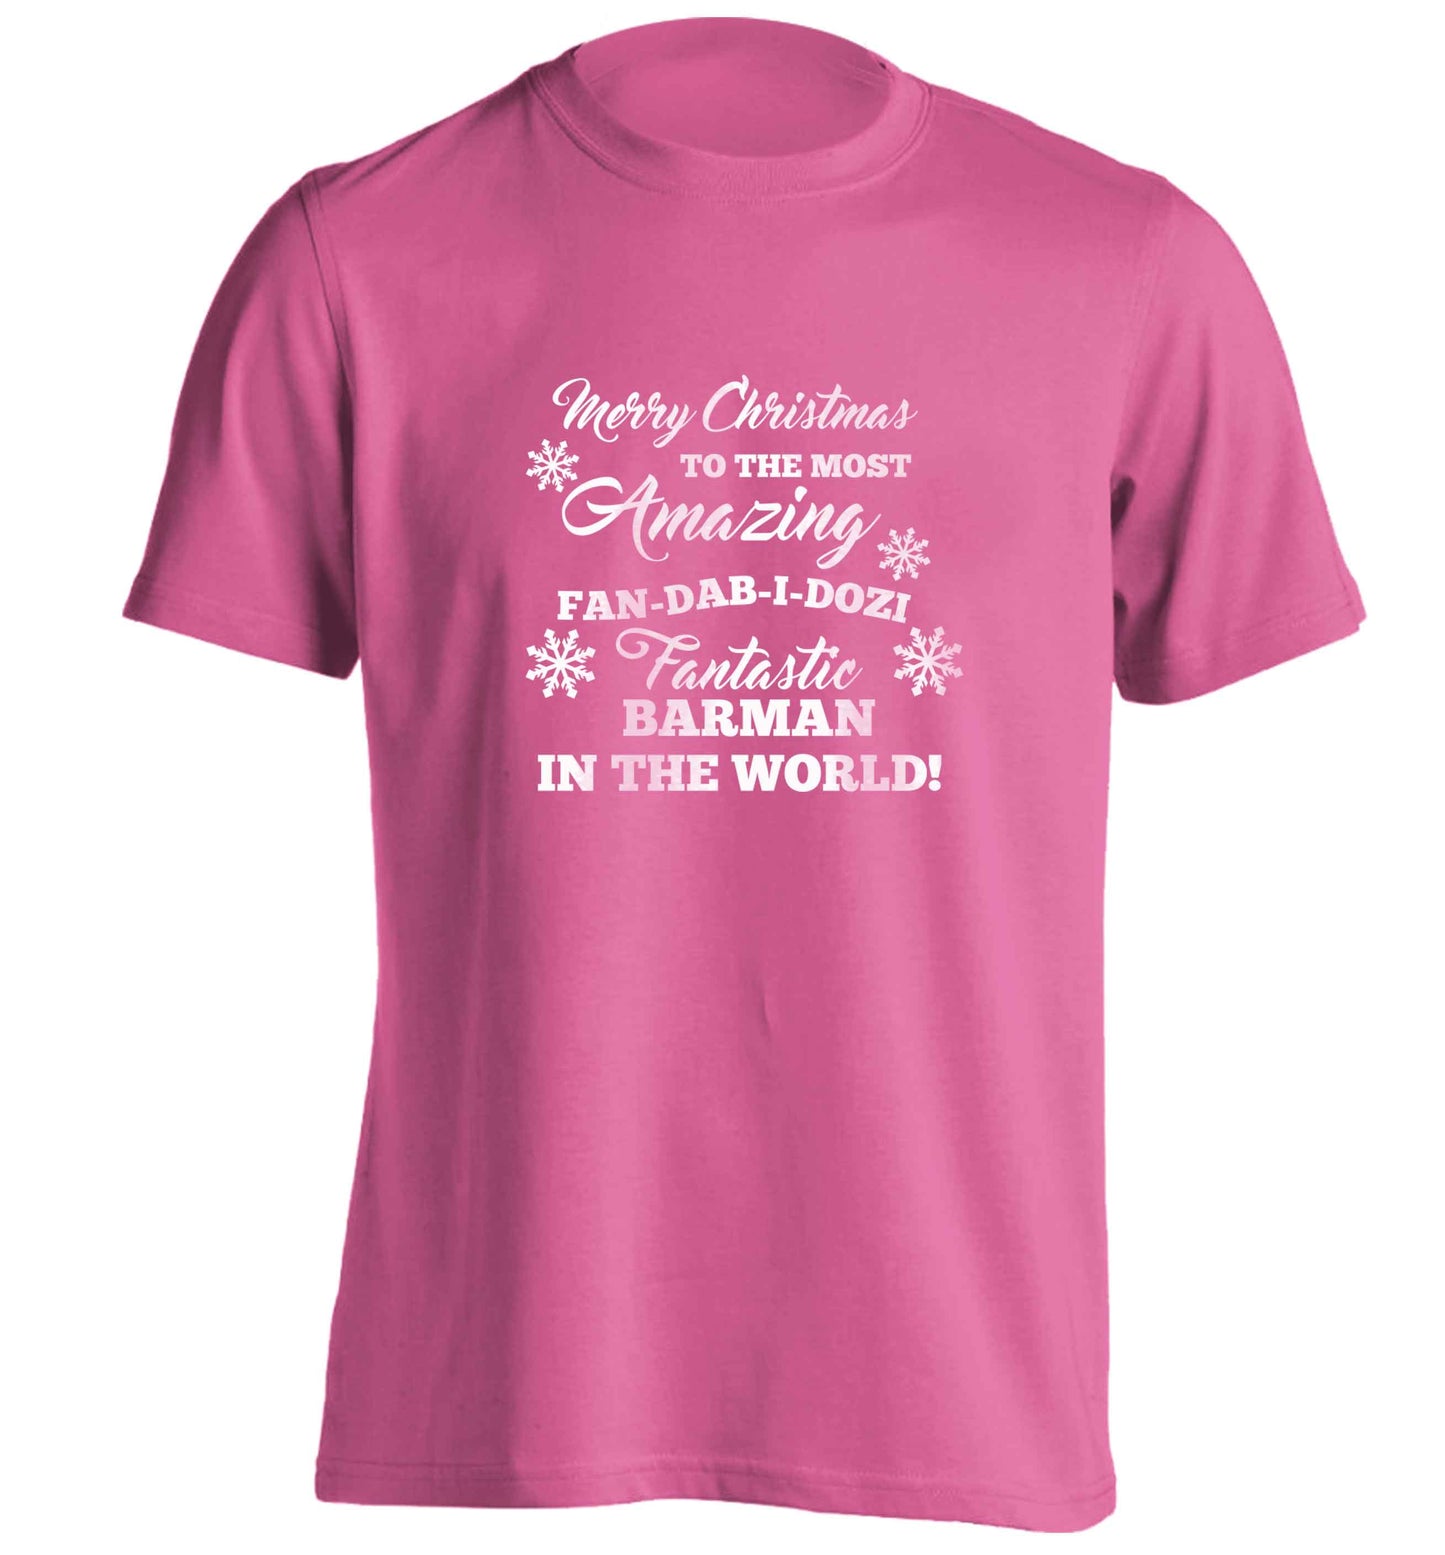 Merry Christmas to the most amazing barman in the world! adults unisex pink Tshirt 2XL